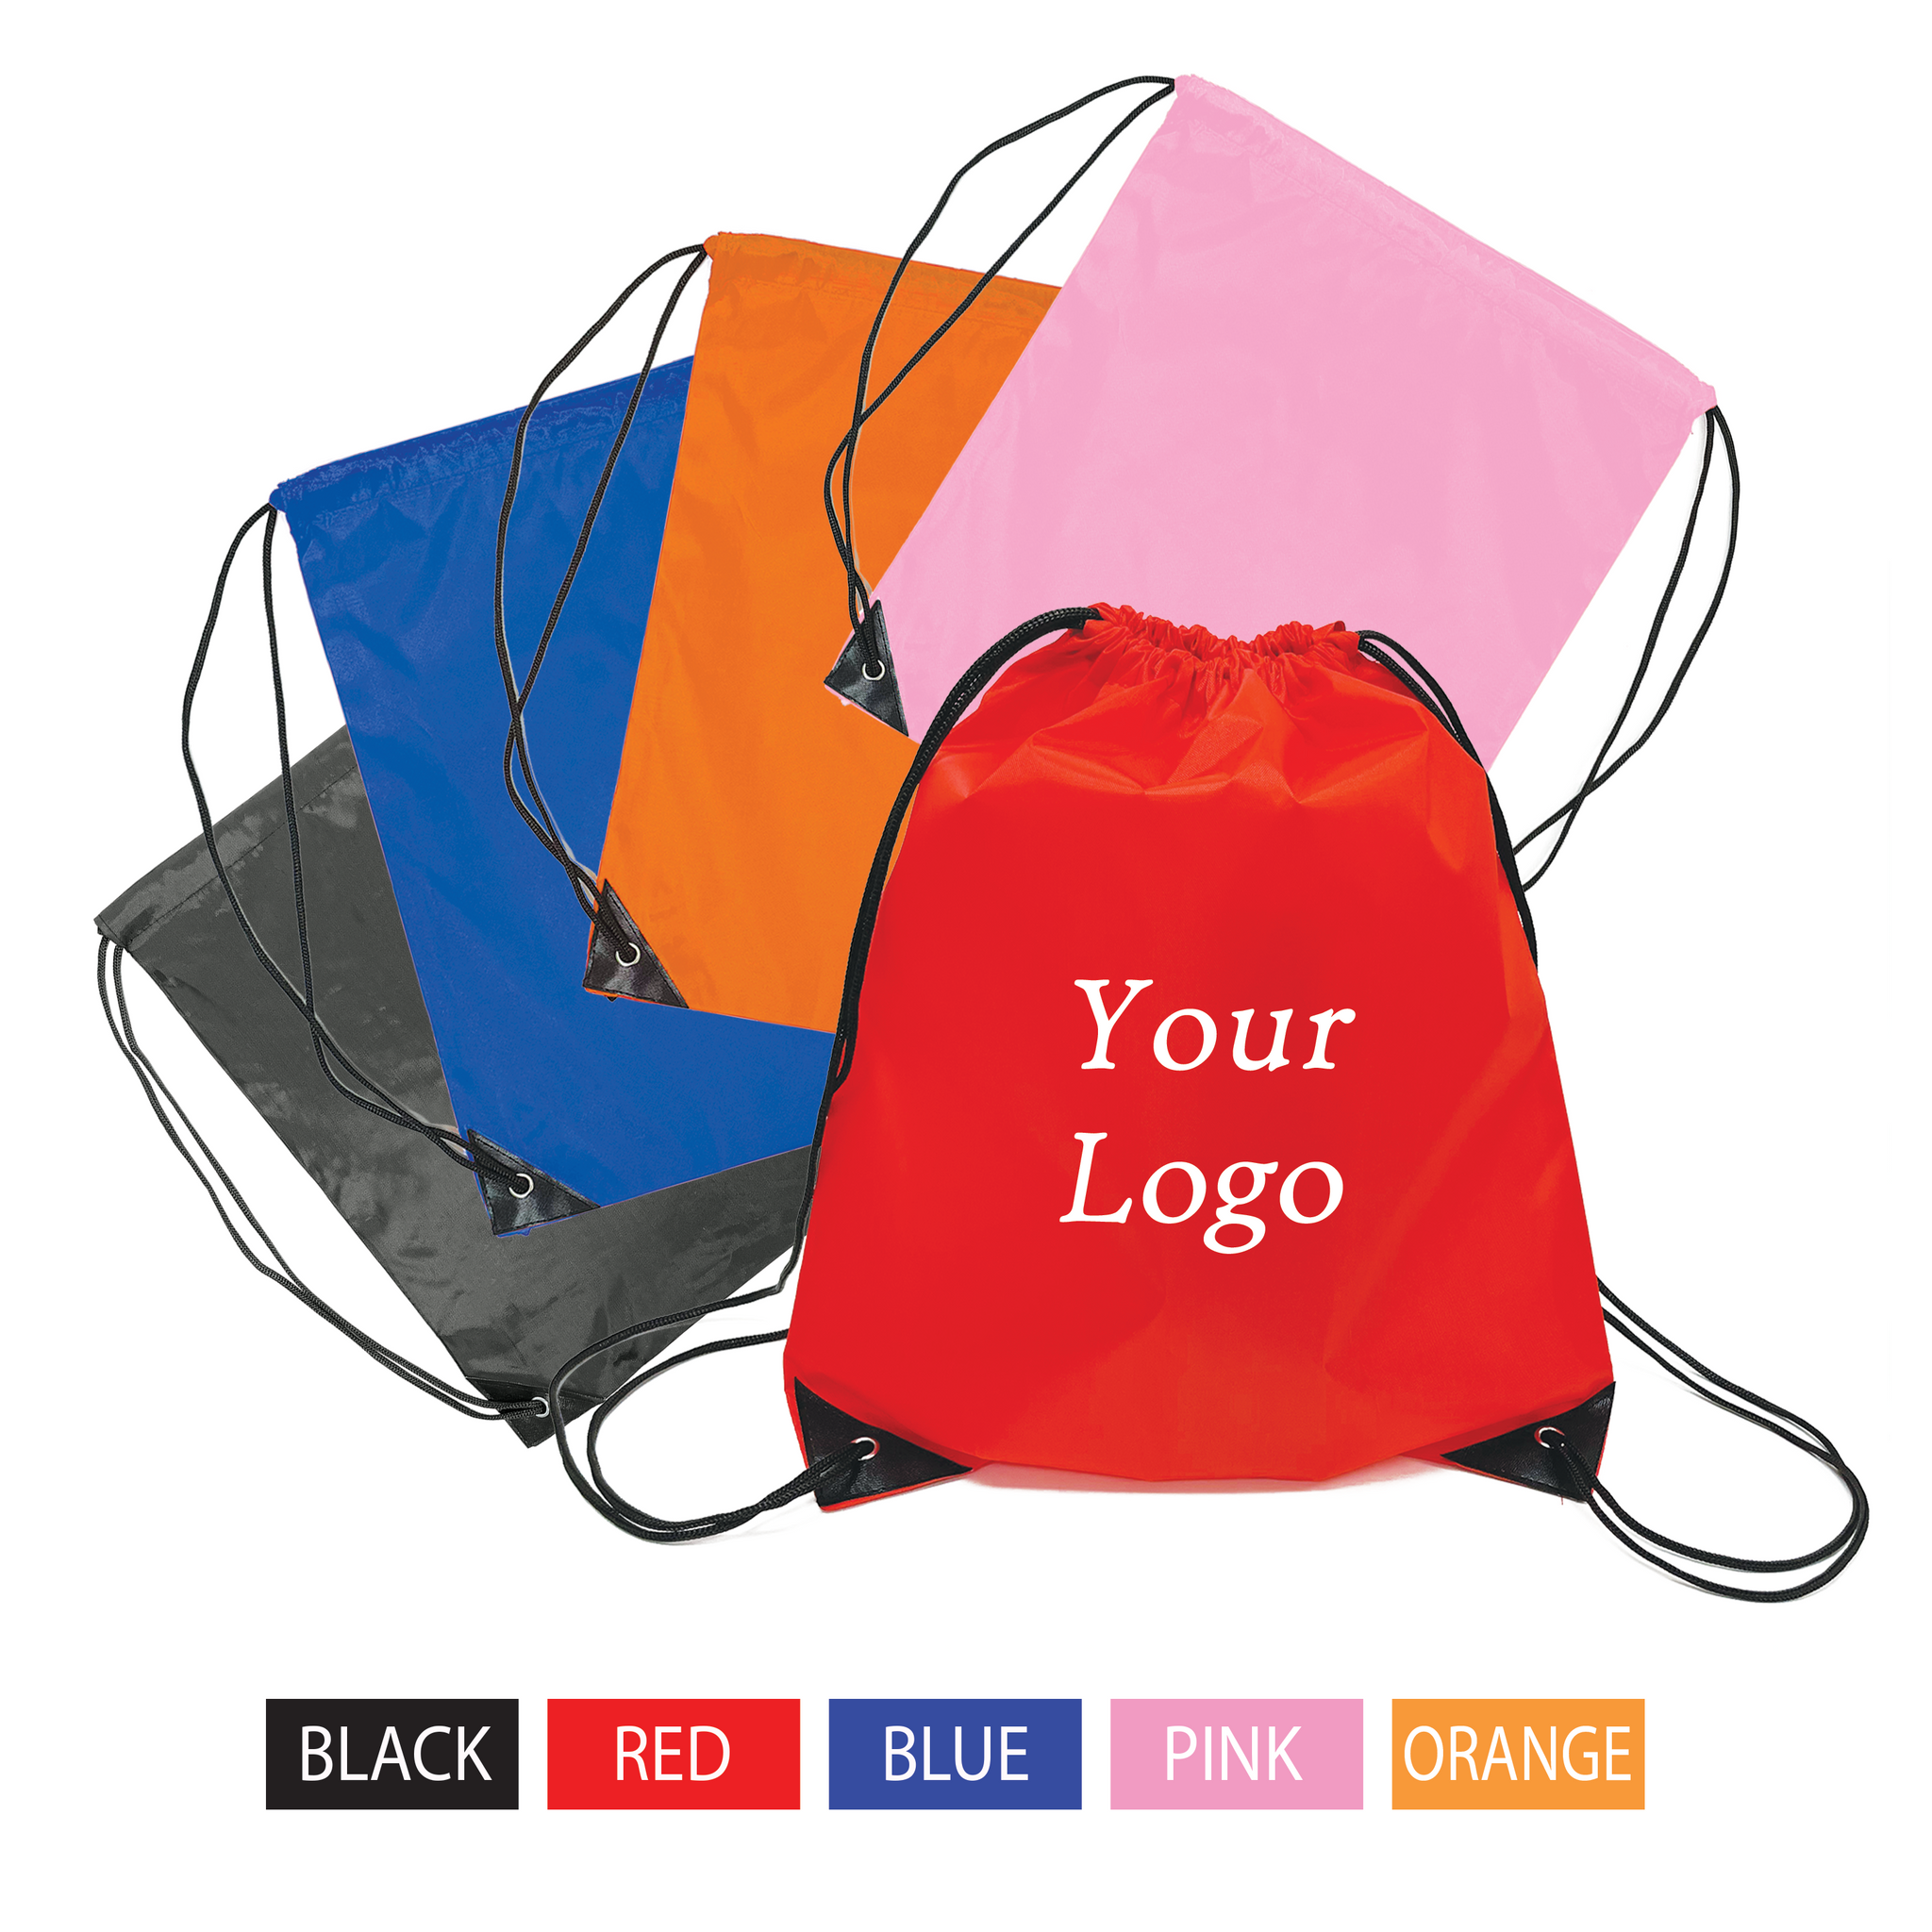 Promotional drawstring backpack with logo